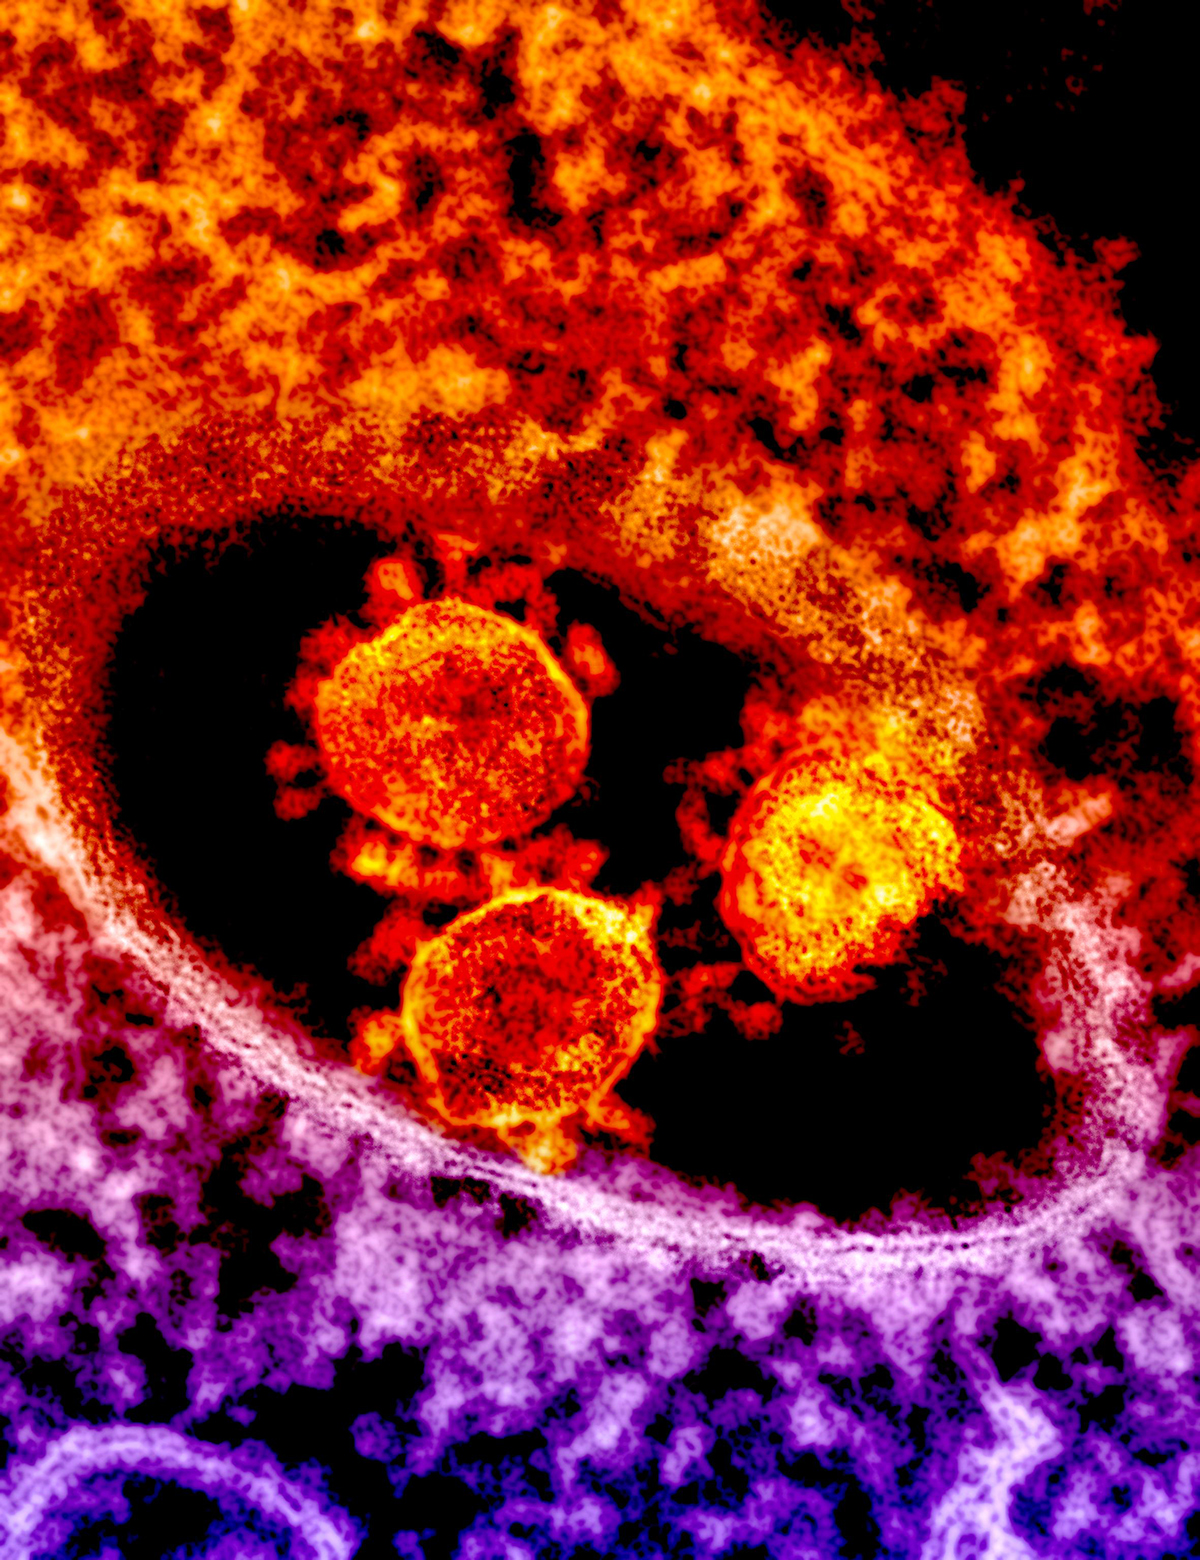 Electron micrograph showing particles of the MERS Coronavirus